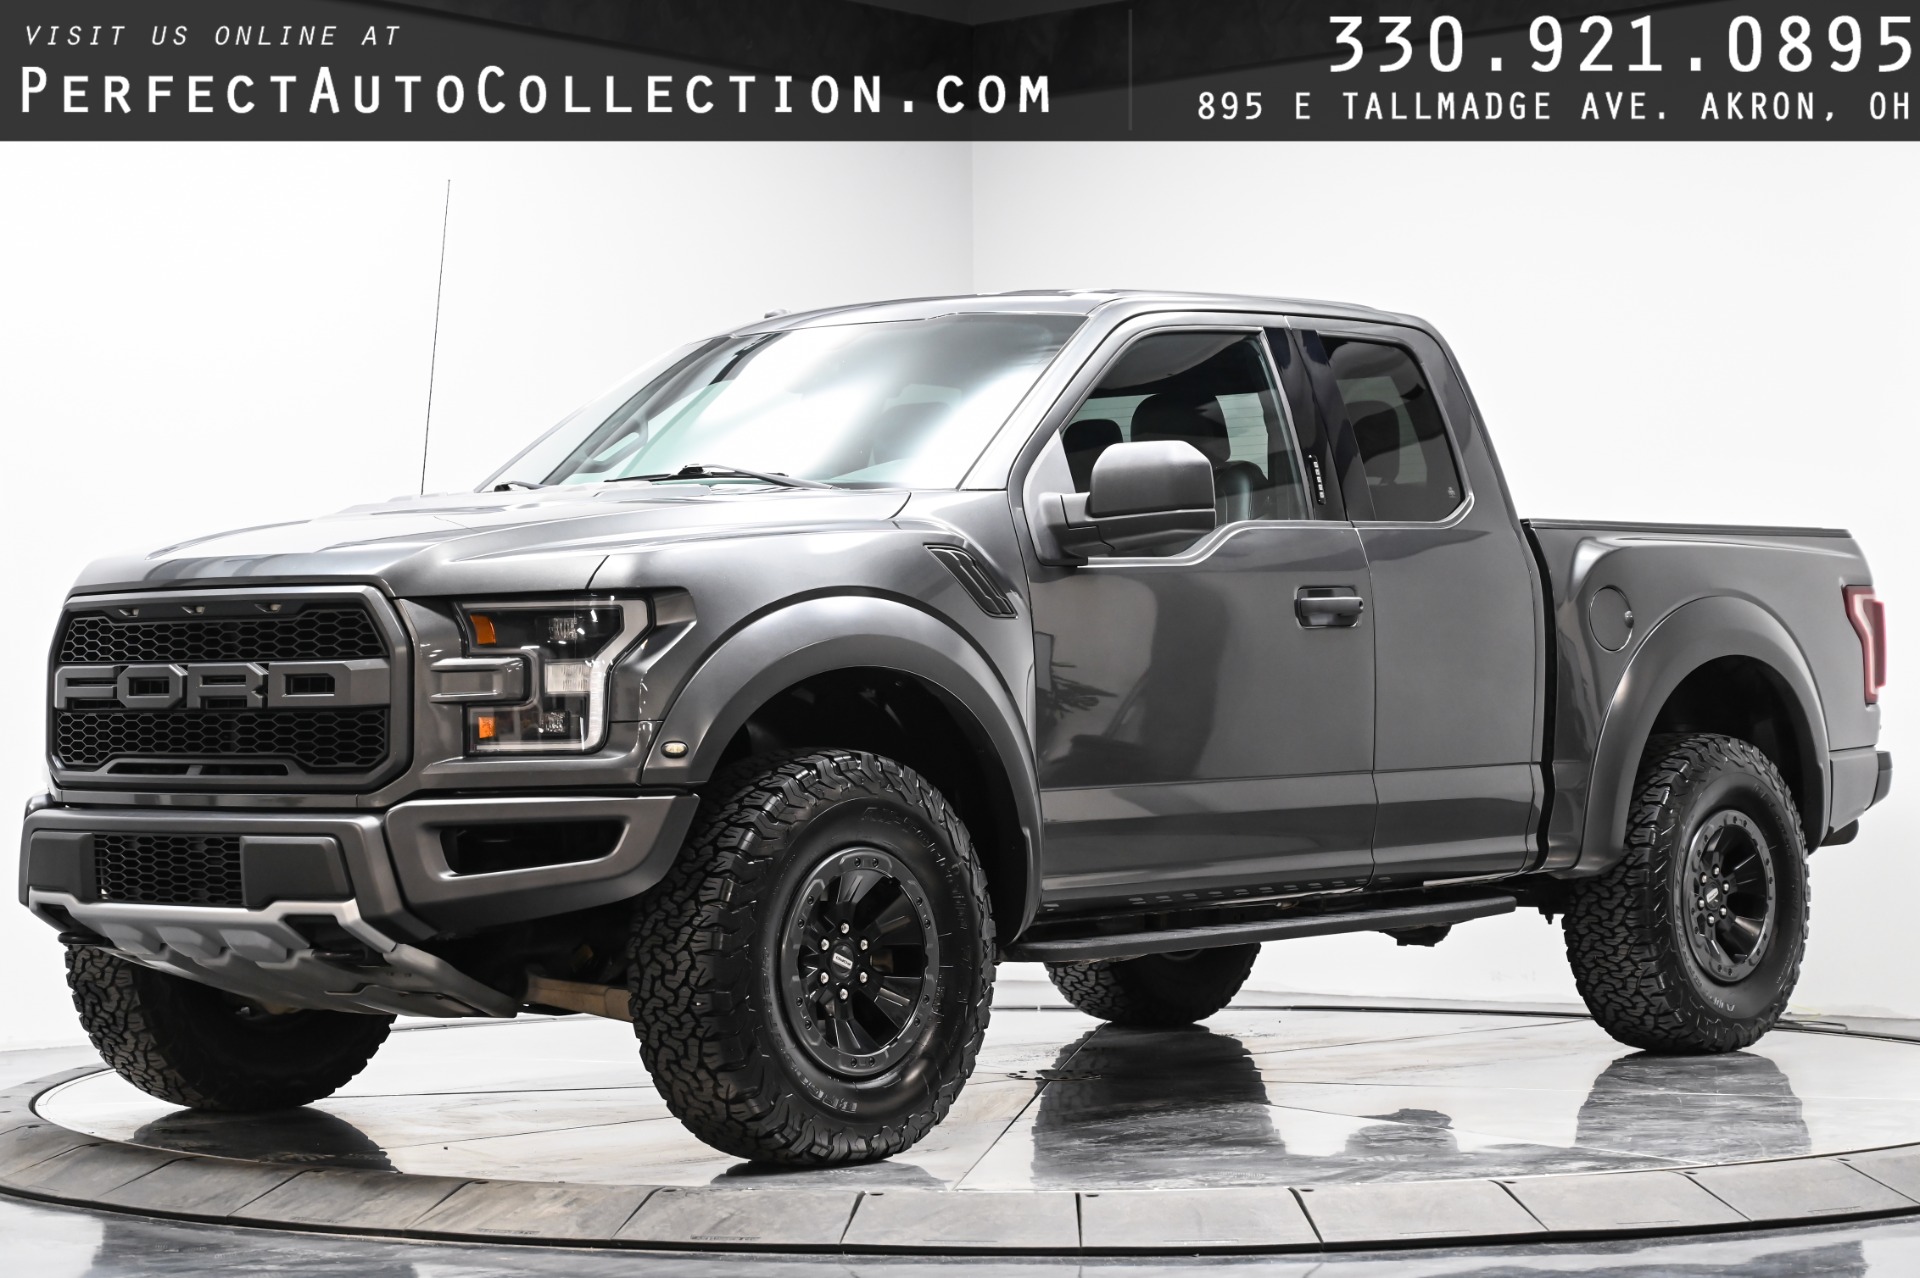 Used 2018 Ford F-150 Raptor For Sale (Sold) | Perfect Auto Collection ...